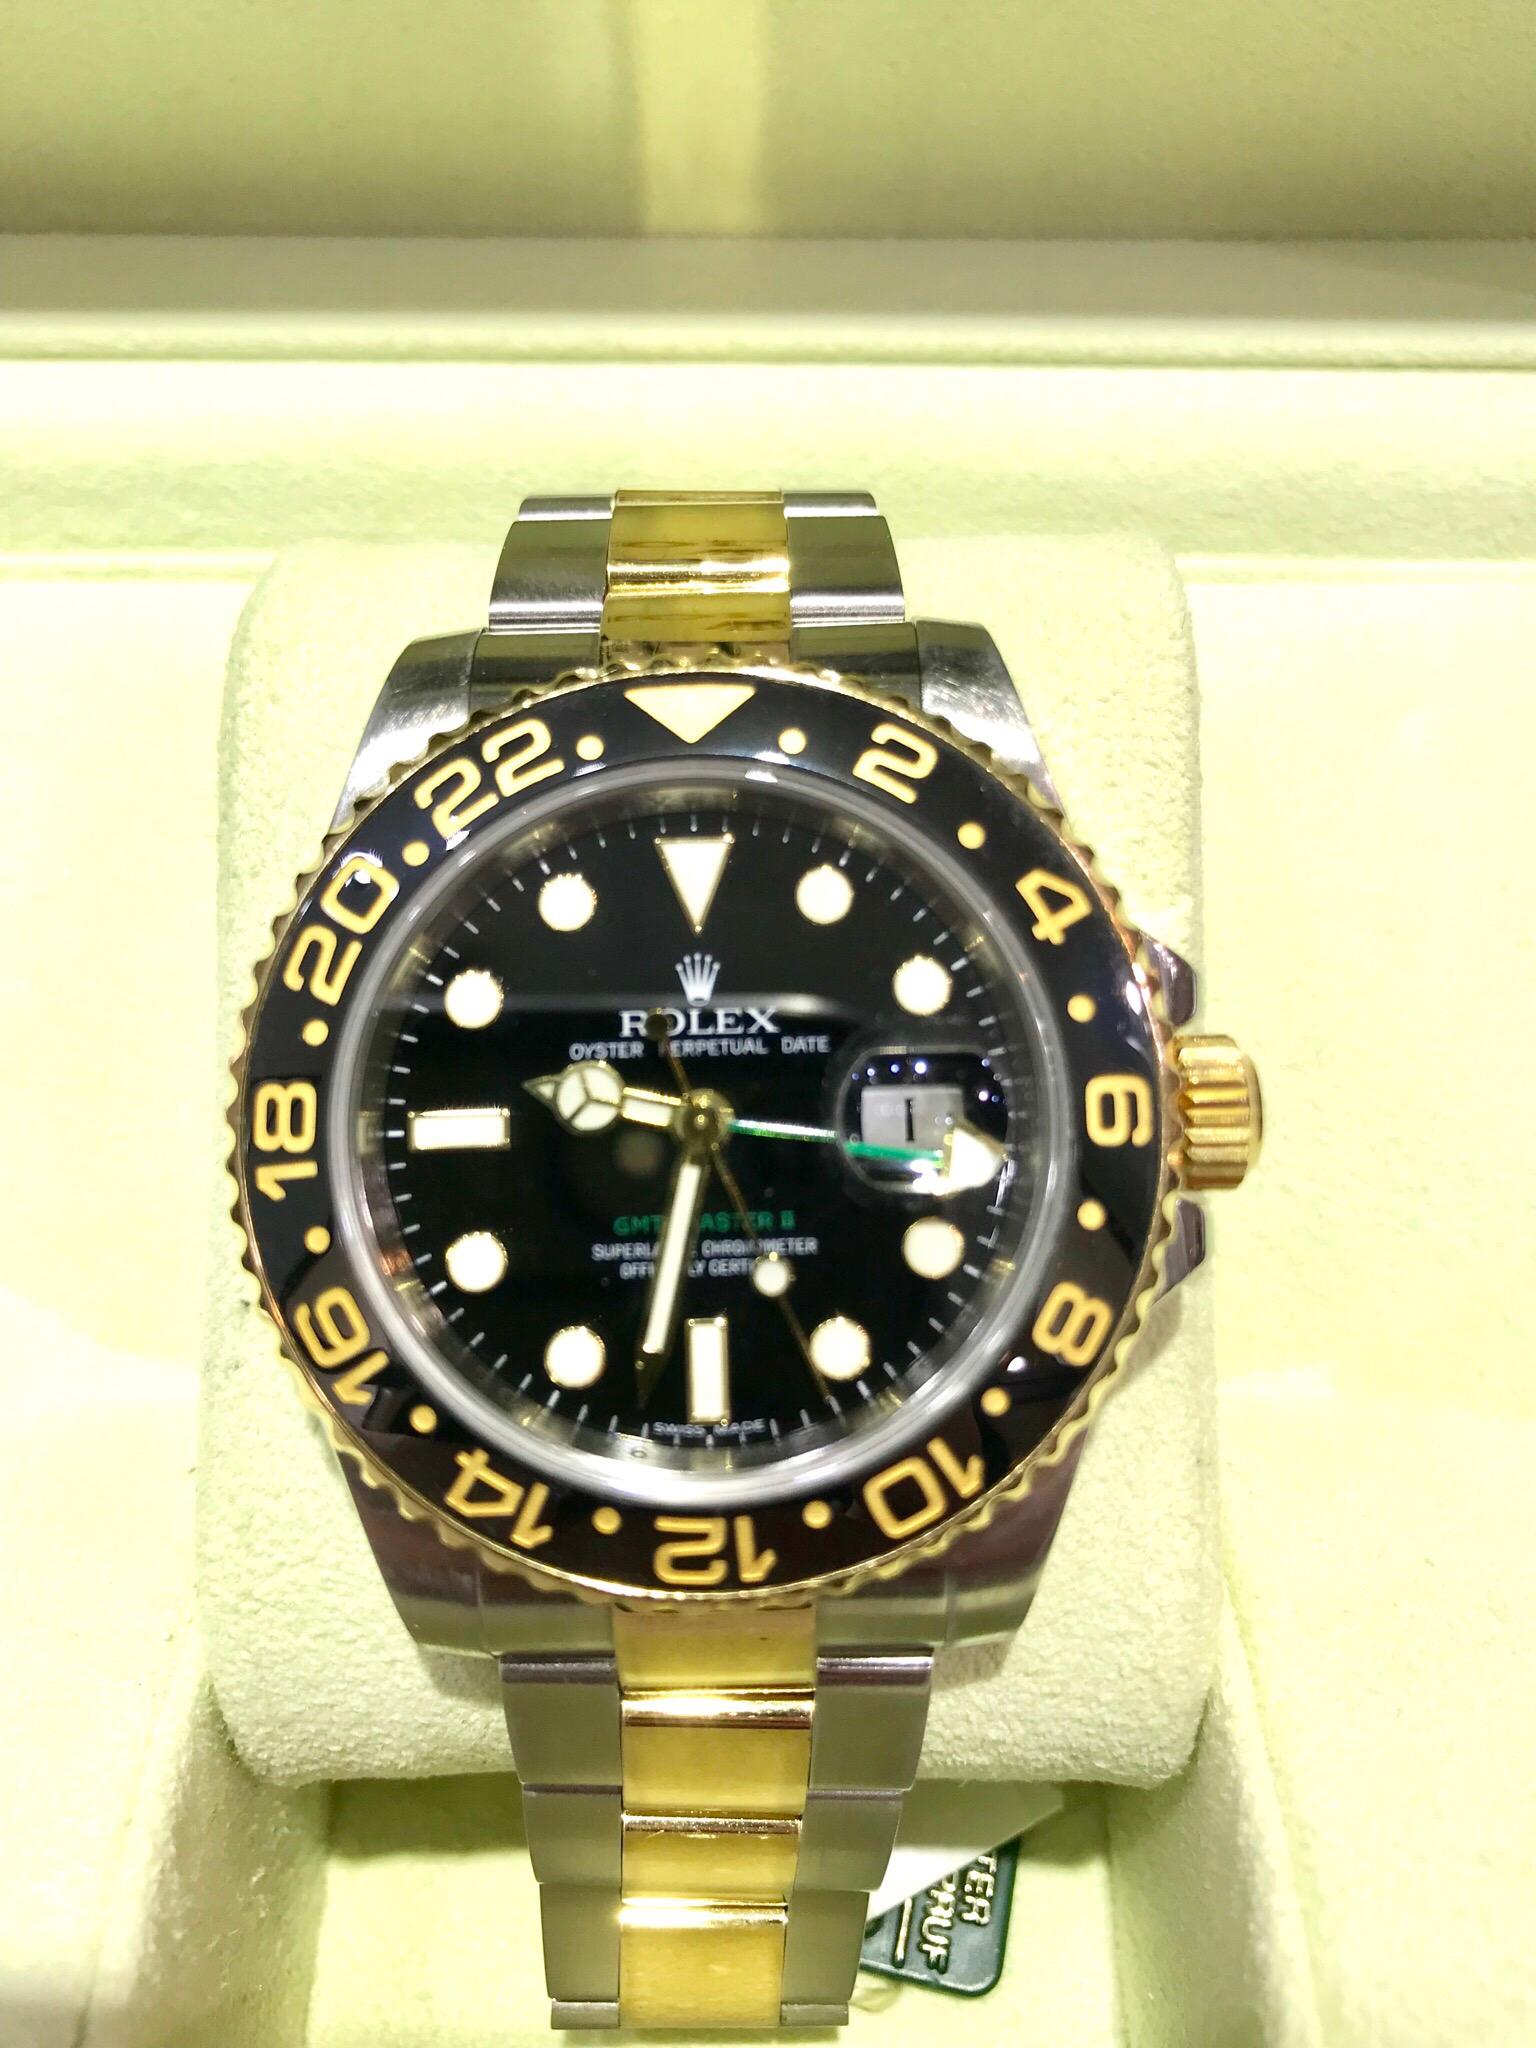 An excellent condition iconic Rolex GMT Master II with a ceramic bezel.  The watch features the Oyster bracelet, made up of solid 18 karat yellow gold and stainless steel links.  This watch has the original box and papers, including the warranty